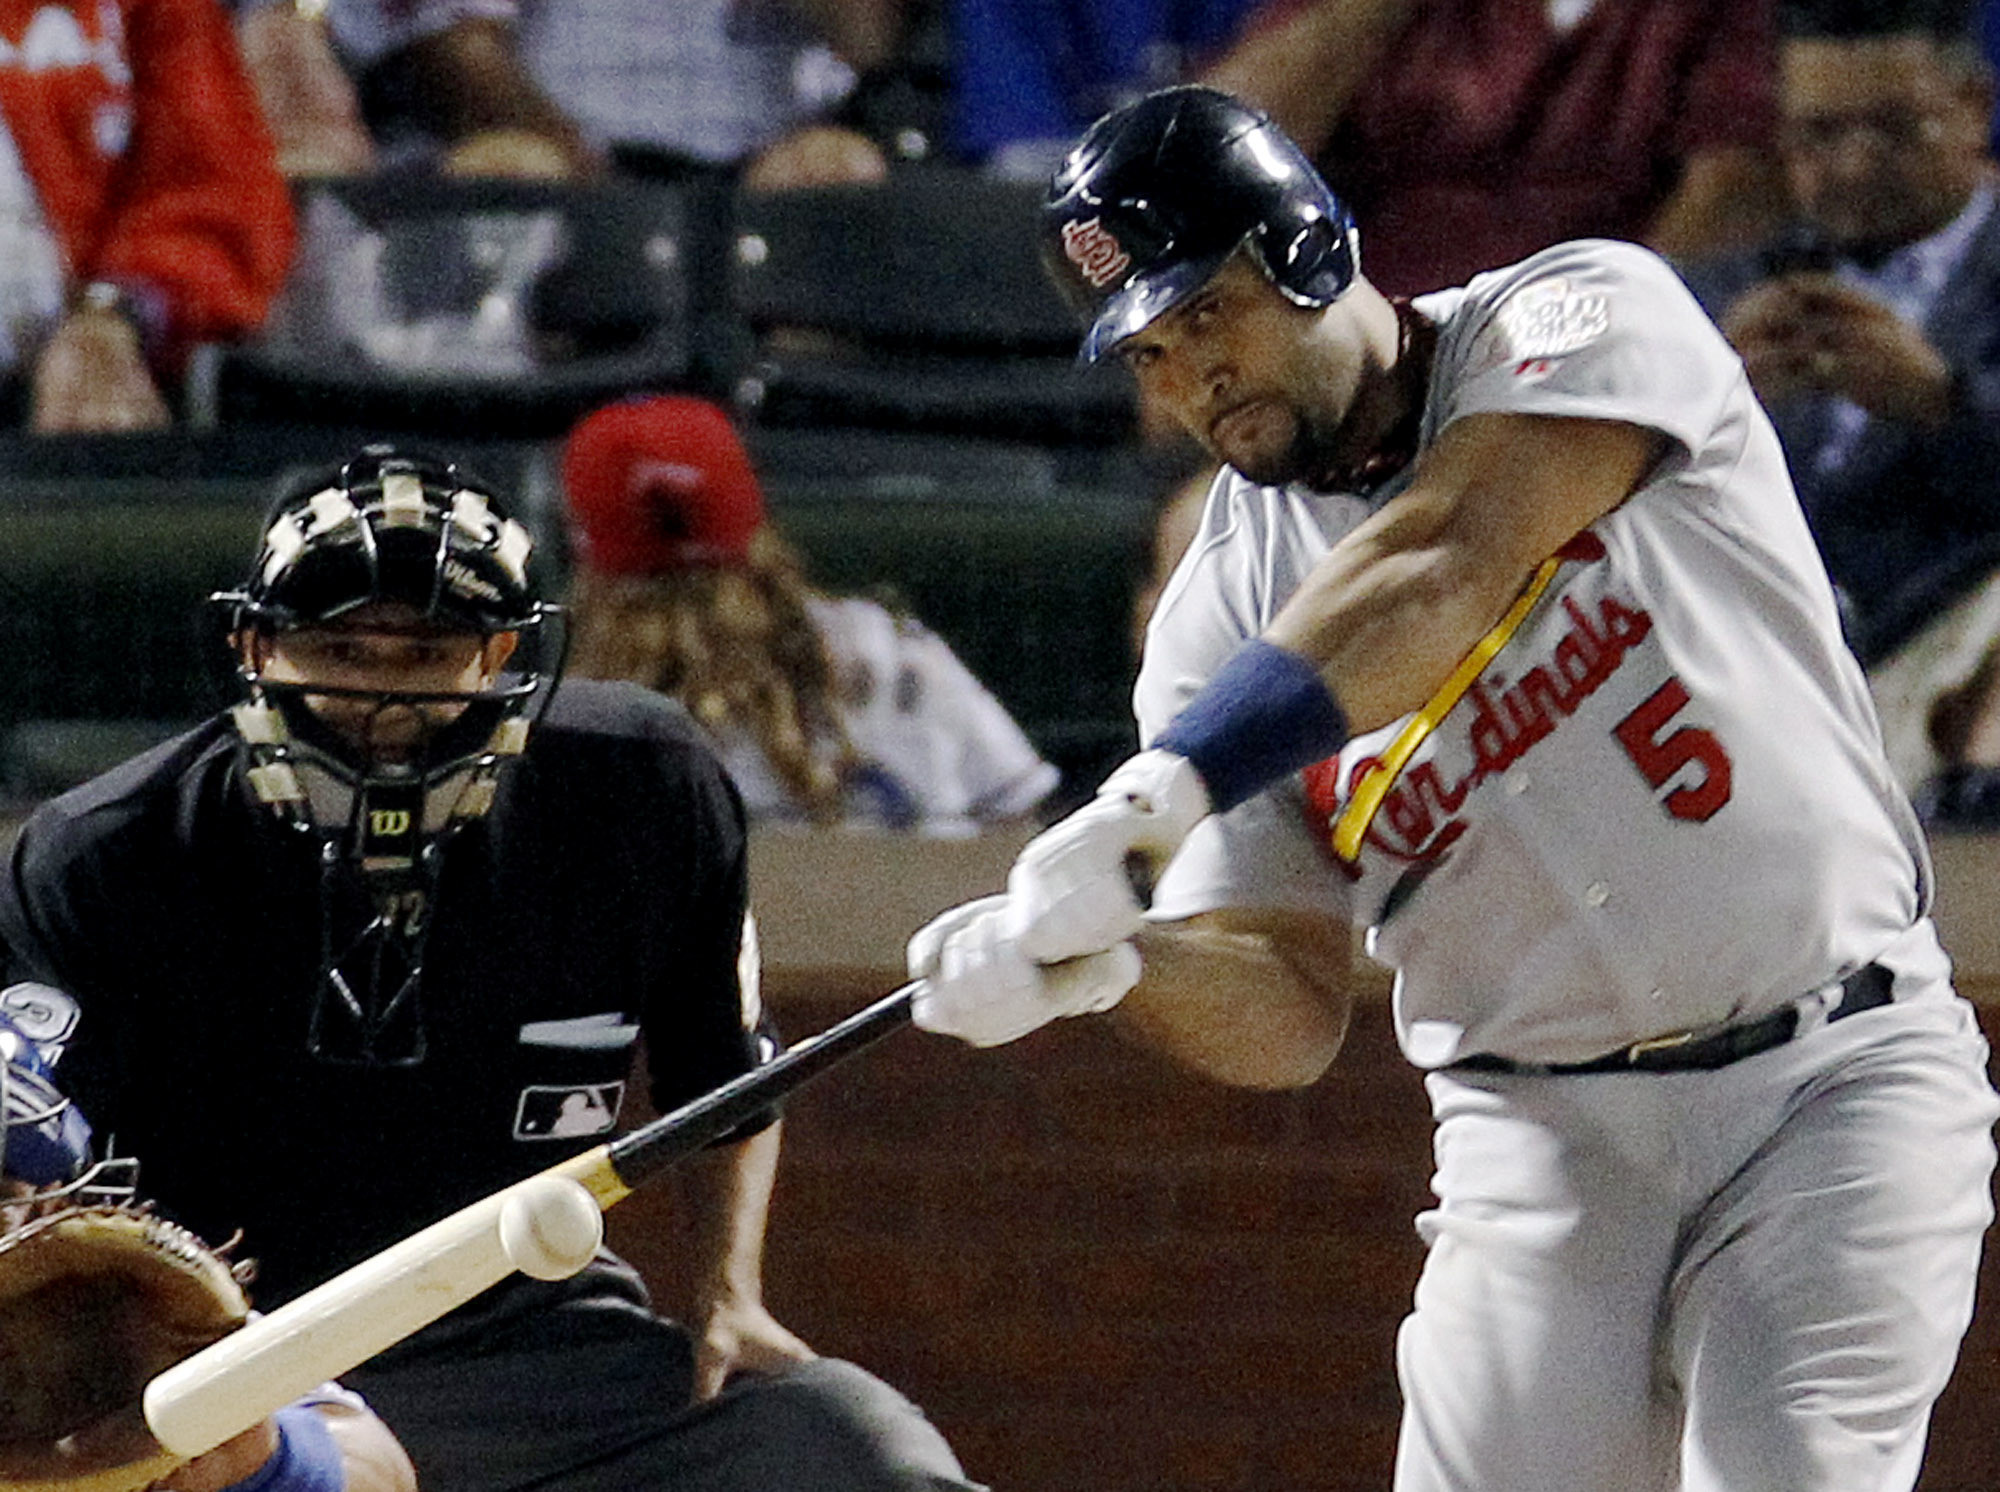 Another special return to St. Louis is ahead for Albert Pujols